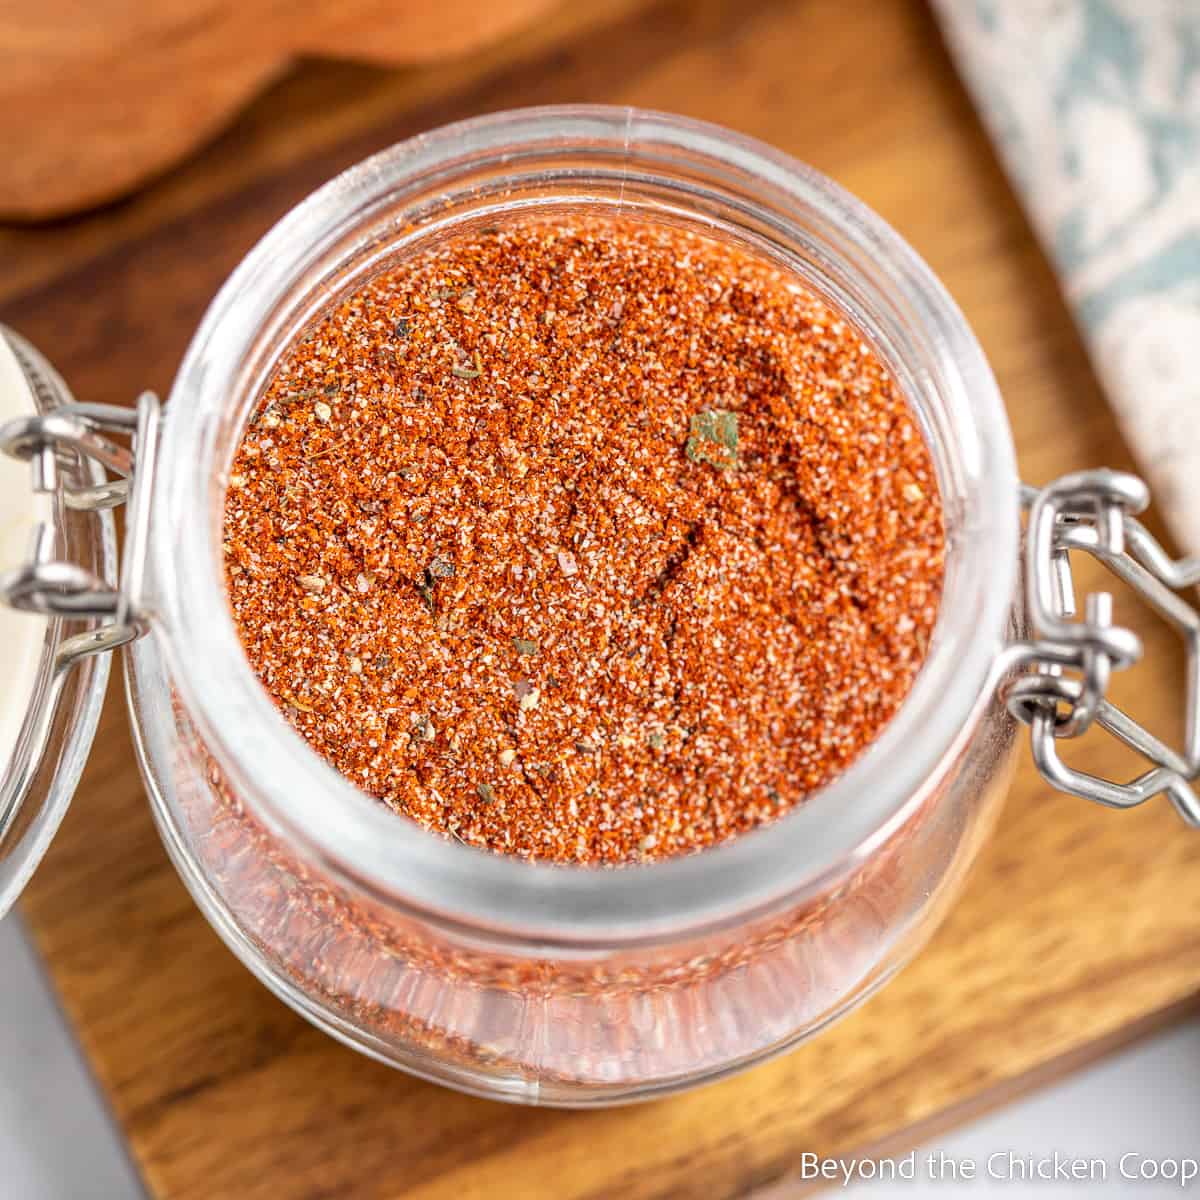 A glass jar filled with a red spice blend.